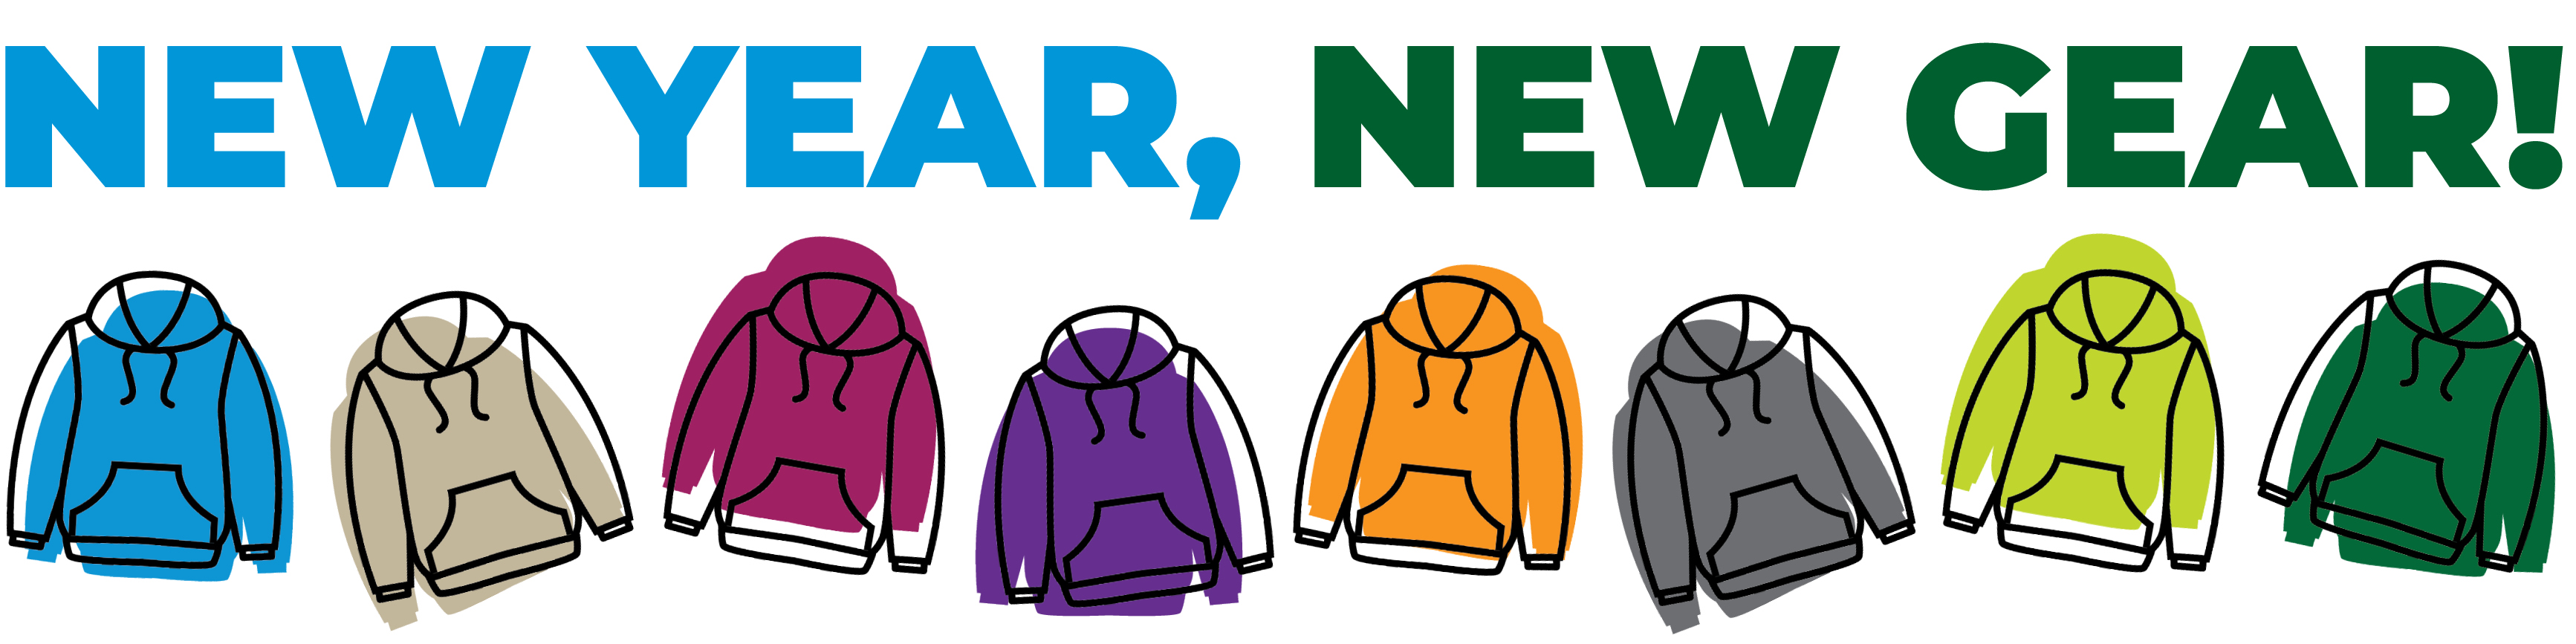 text reads "NEW YEAR, NEW GEAR!" with illustrations of multicolored hoodies in blue, tan, pink, purple, orange, grey, light green, and dark green.